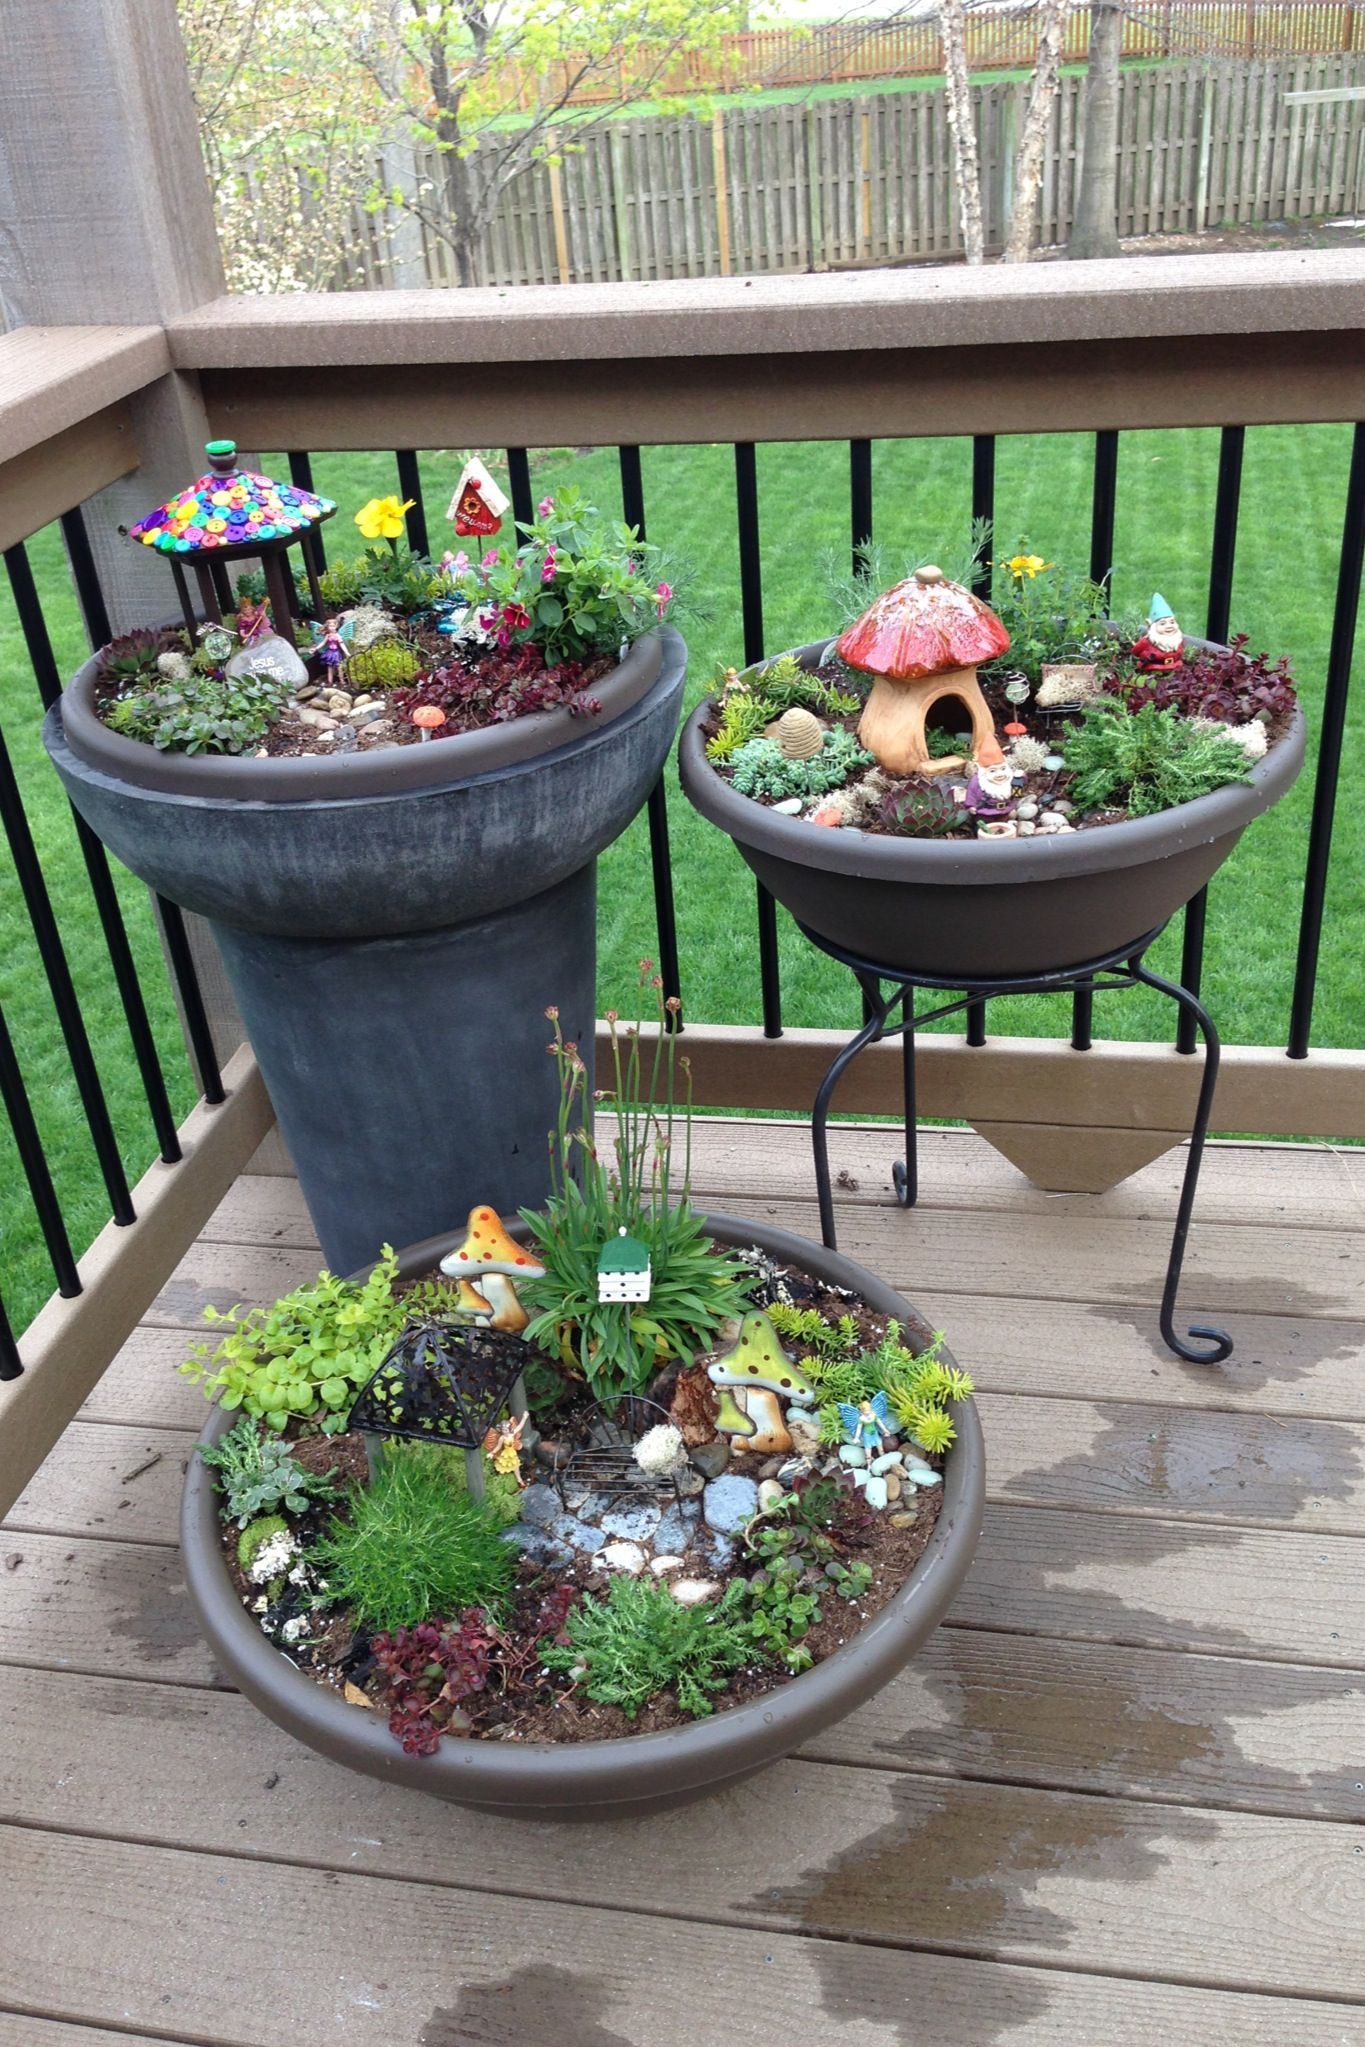 Fairy gardens often use rocks to color or for stepping stones. They also use small plants, sticks, fabrics, small decorations, and